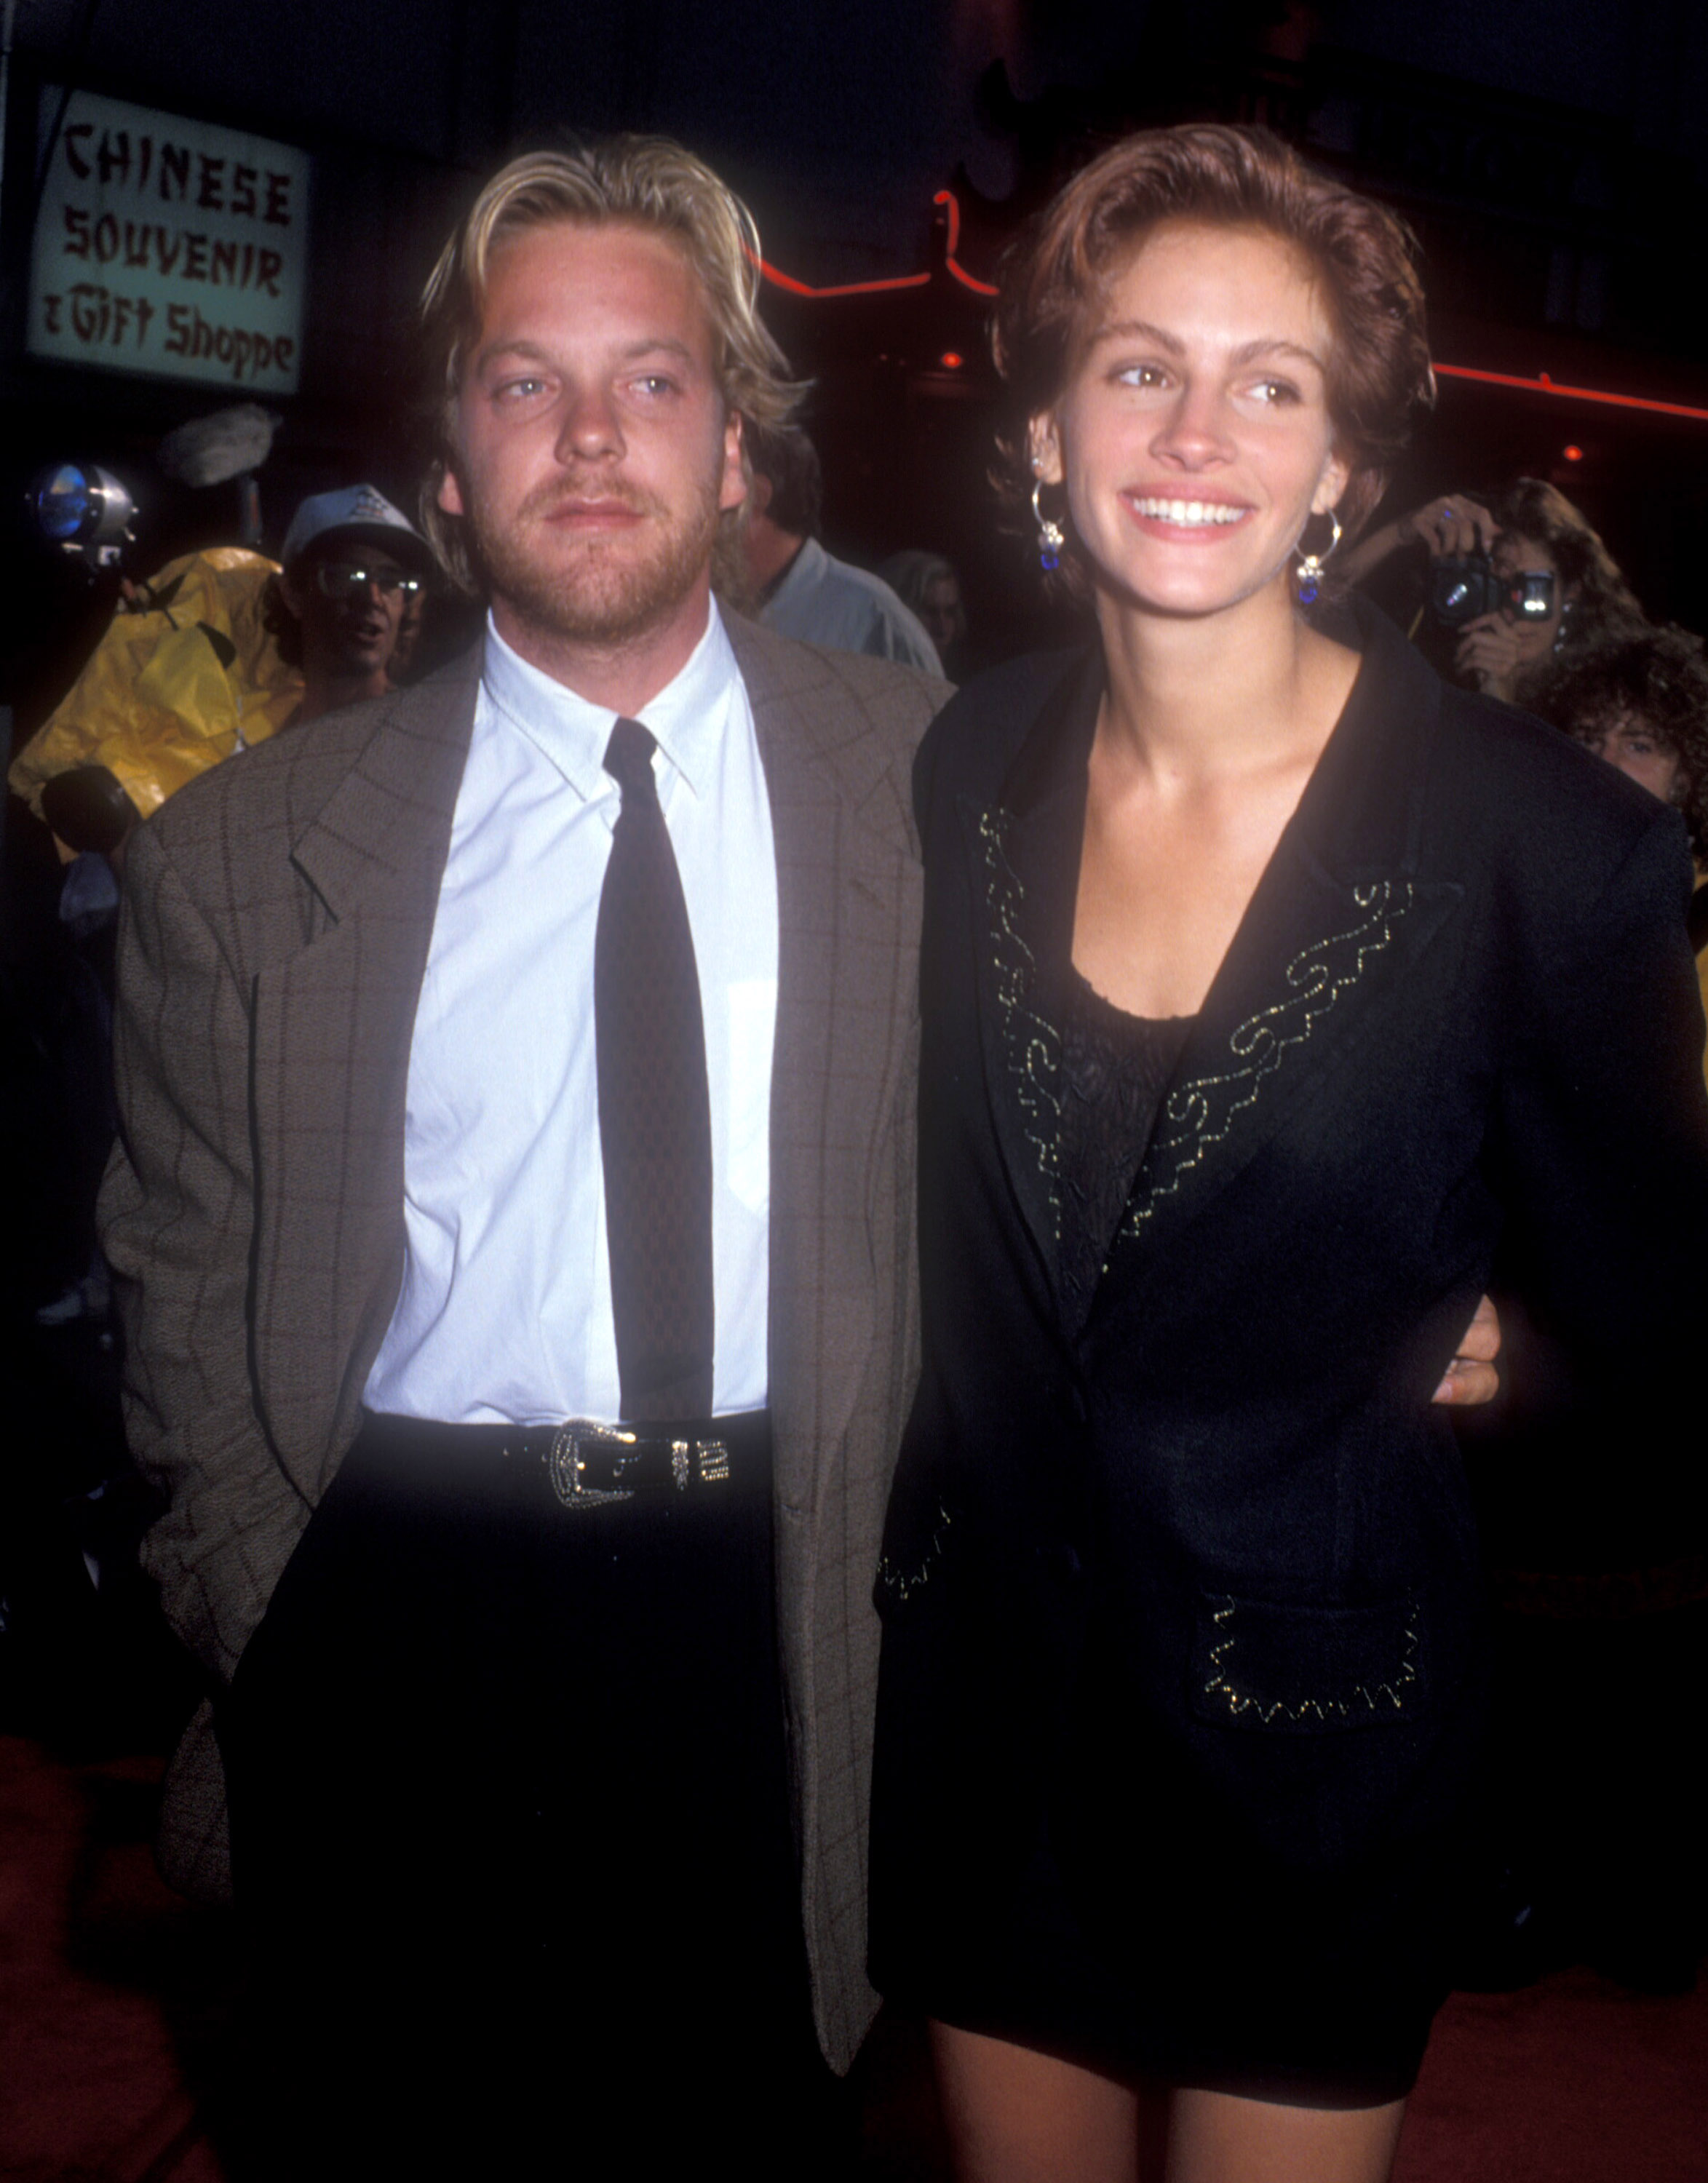 Kiefer Sutherland and Julia Roberts during Flatliners premiere at Mann's Chinese Theater in Hollywood, California, United States in 1990.